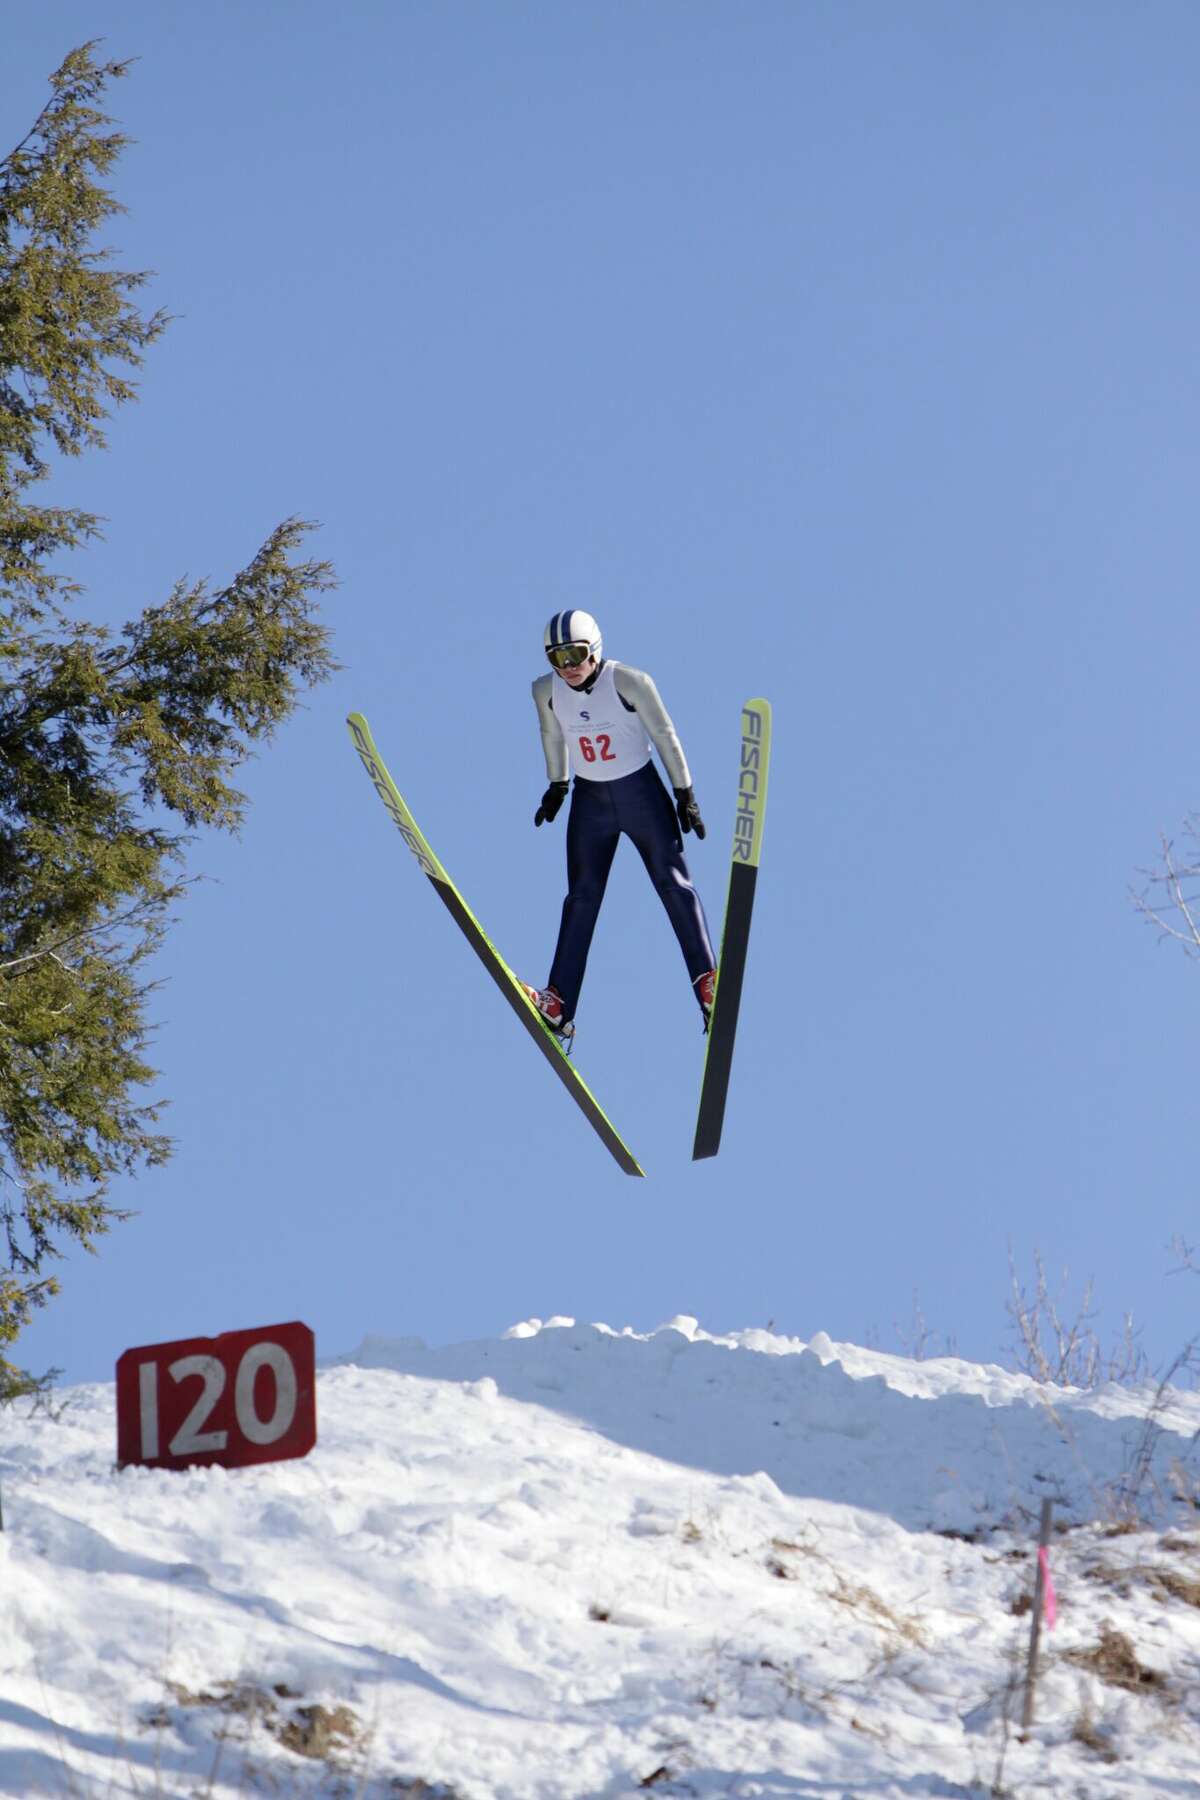 The 97th annual Jumpfest, where spectators can watch Olympic hopefuls compete on Satre Hill, at 80 Indian Cave Road, begins Friday night and continues to Sunday, Feb. 5.  